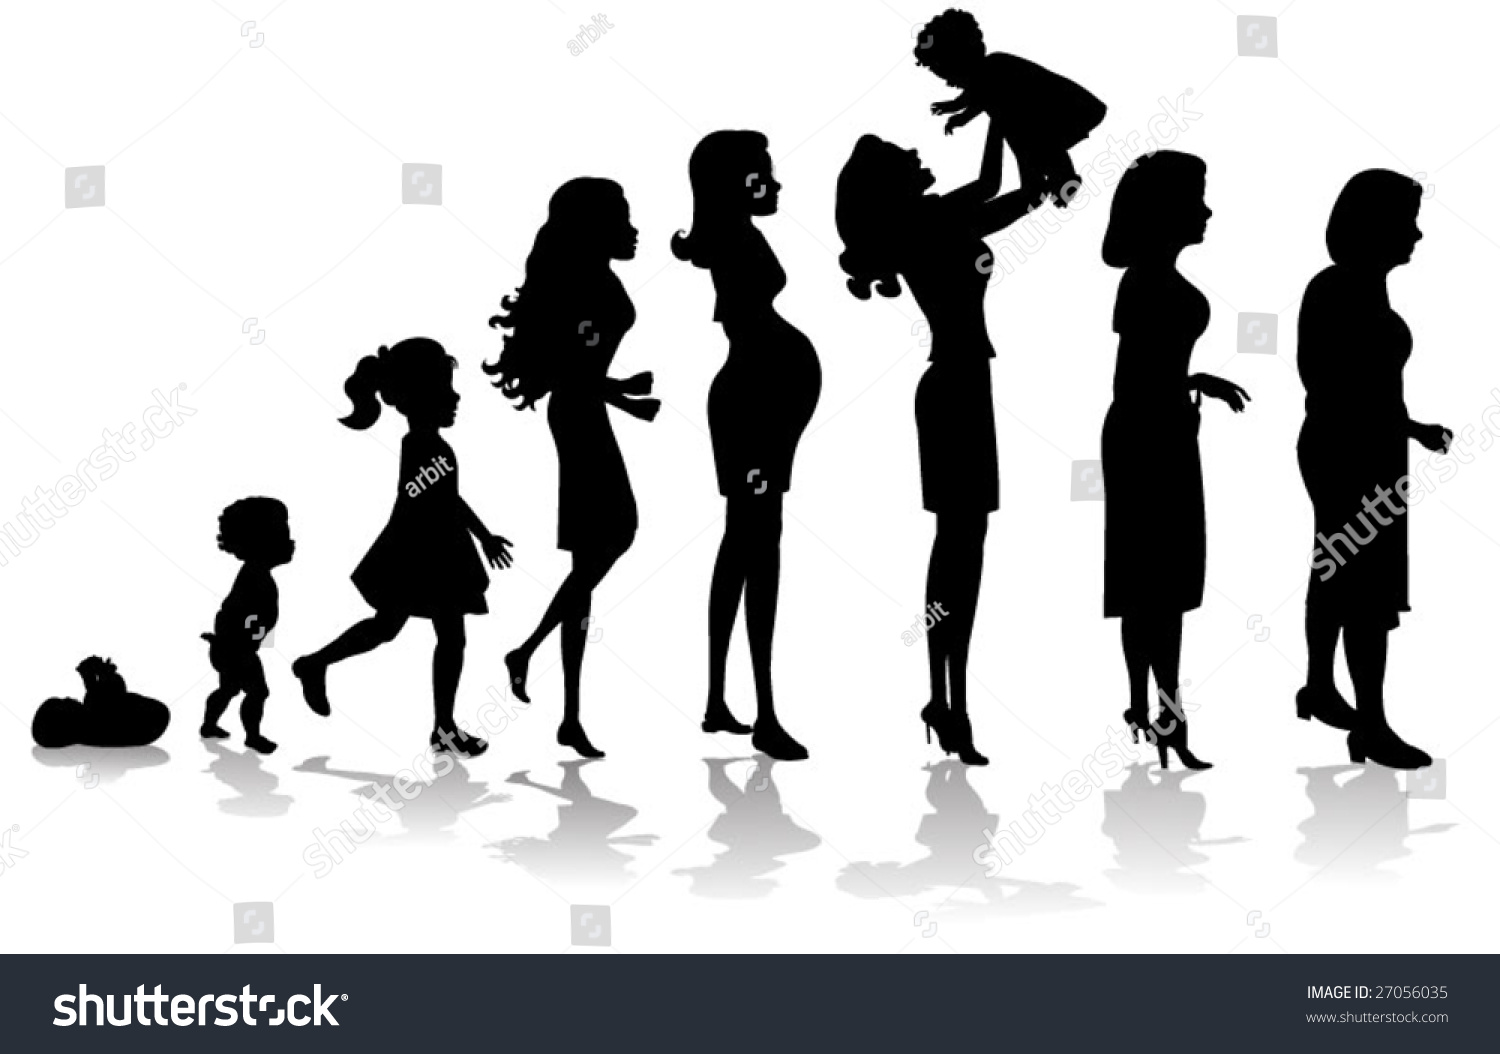 Woman Stages Development Silhouettes Stock Vector 27056035 - Shutterstock